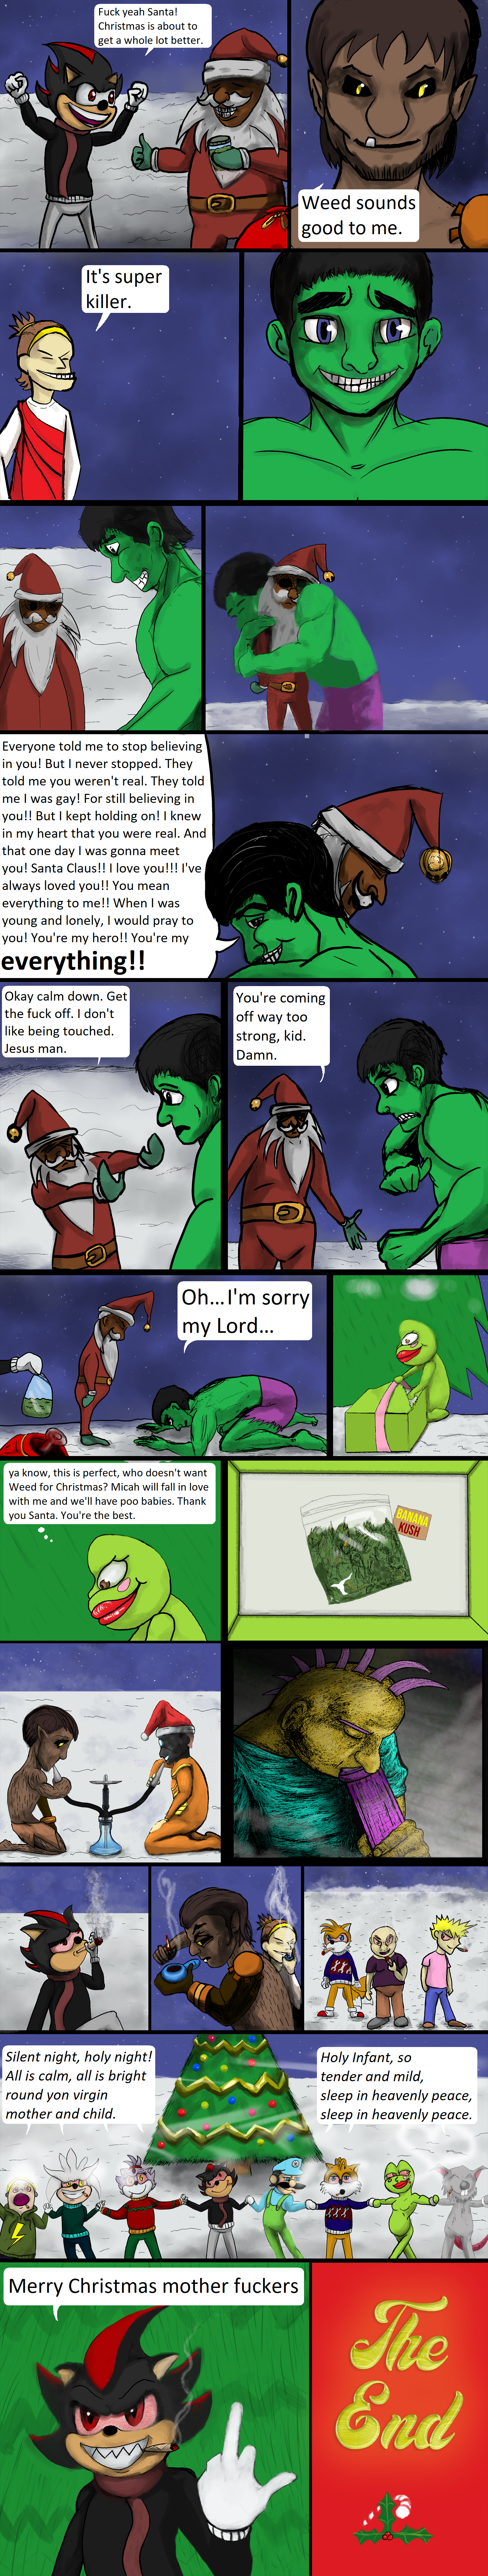 xmas/pg5.png. If you're seeing this, enable images. Or, perhaps we have a website issue. Try refreshing, if unsuccessful email c@commodorian.org with a detailed description of how you got here.